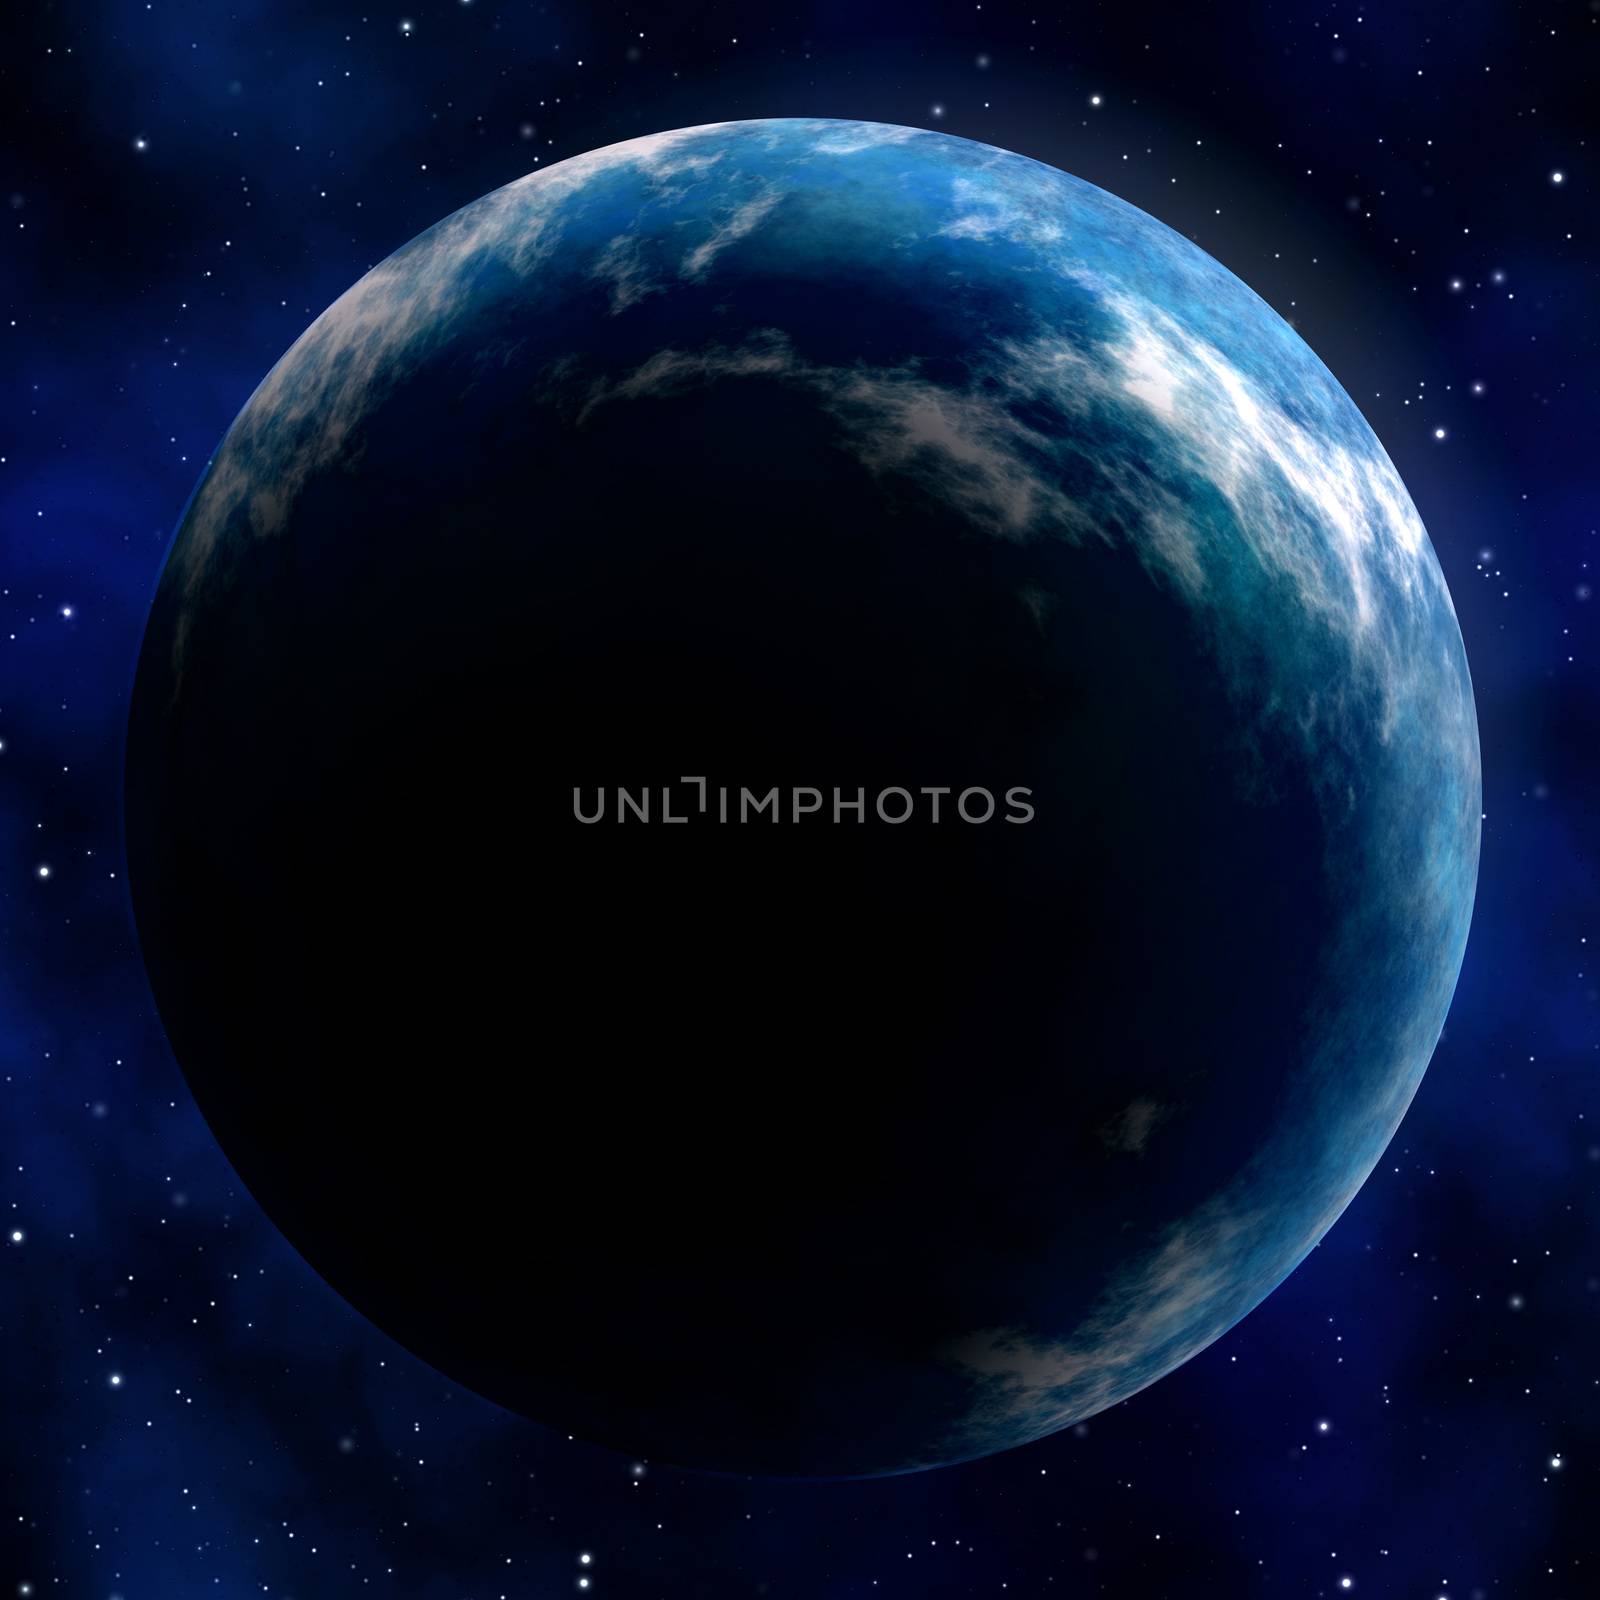 Illustration of the great blue planet earth seen in outer space with stars in the background.